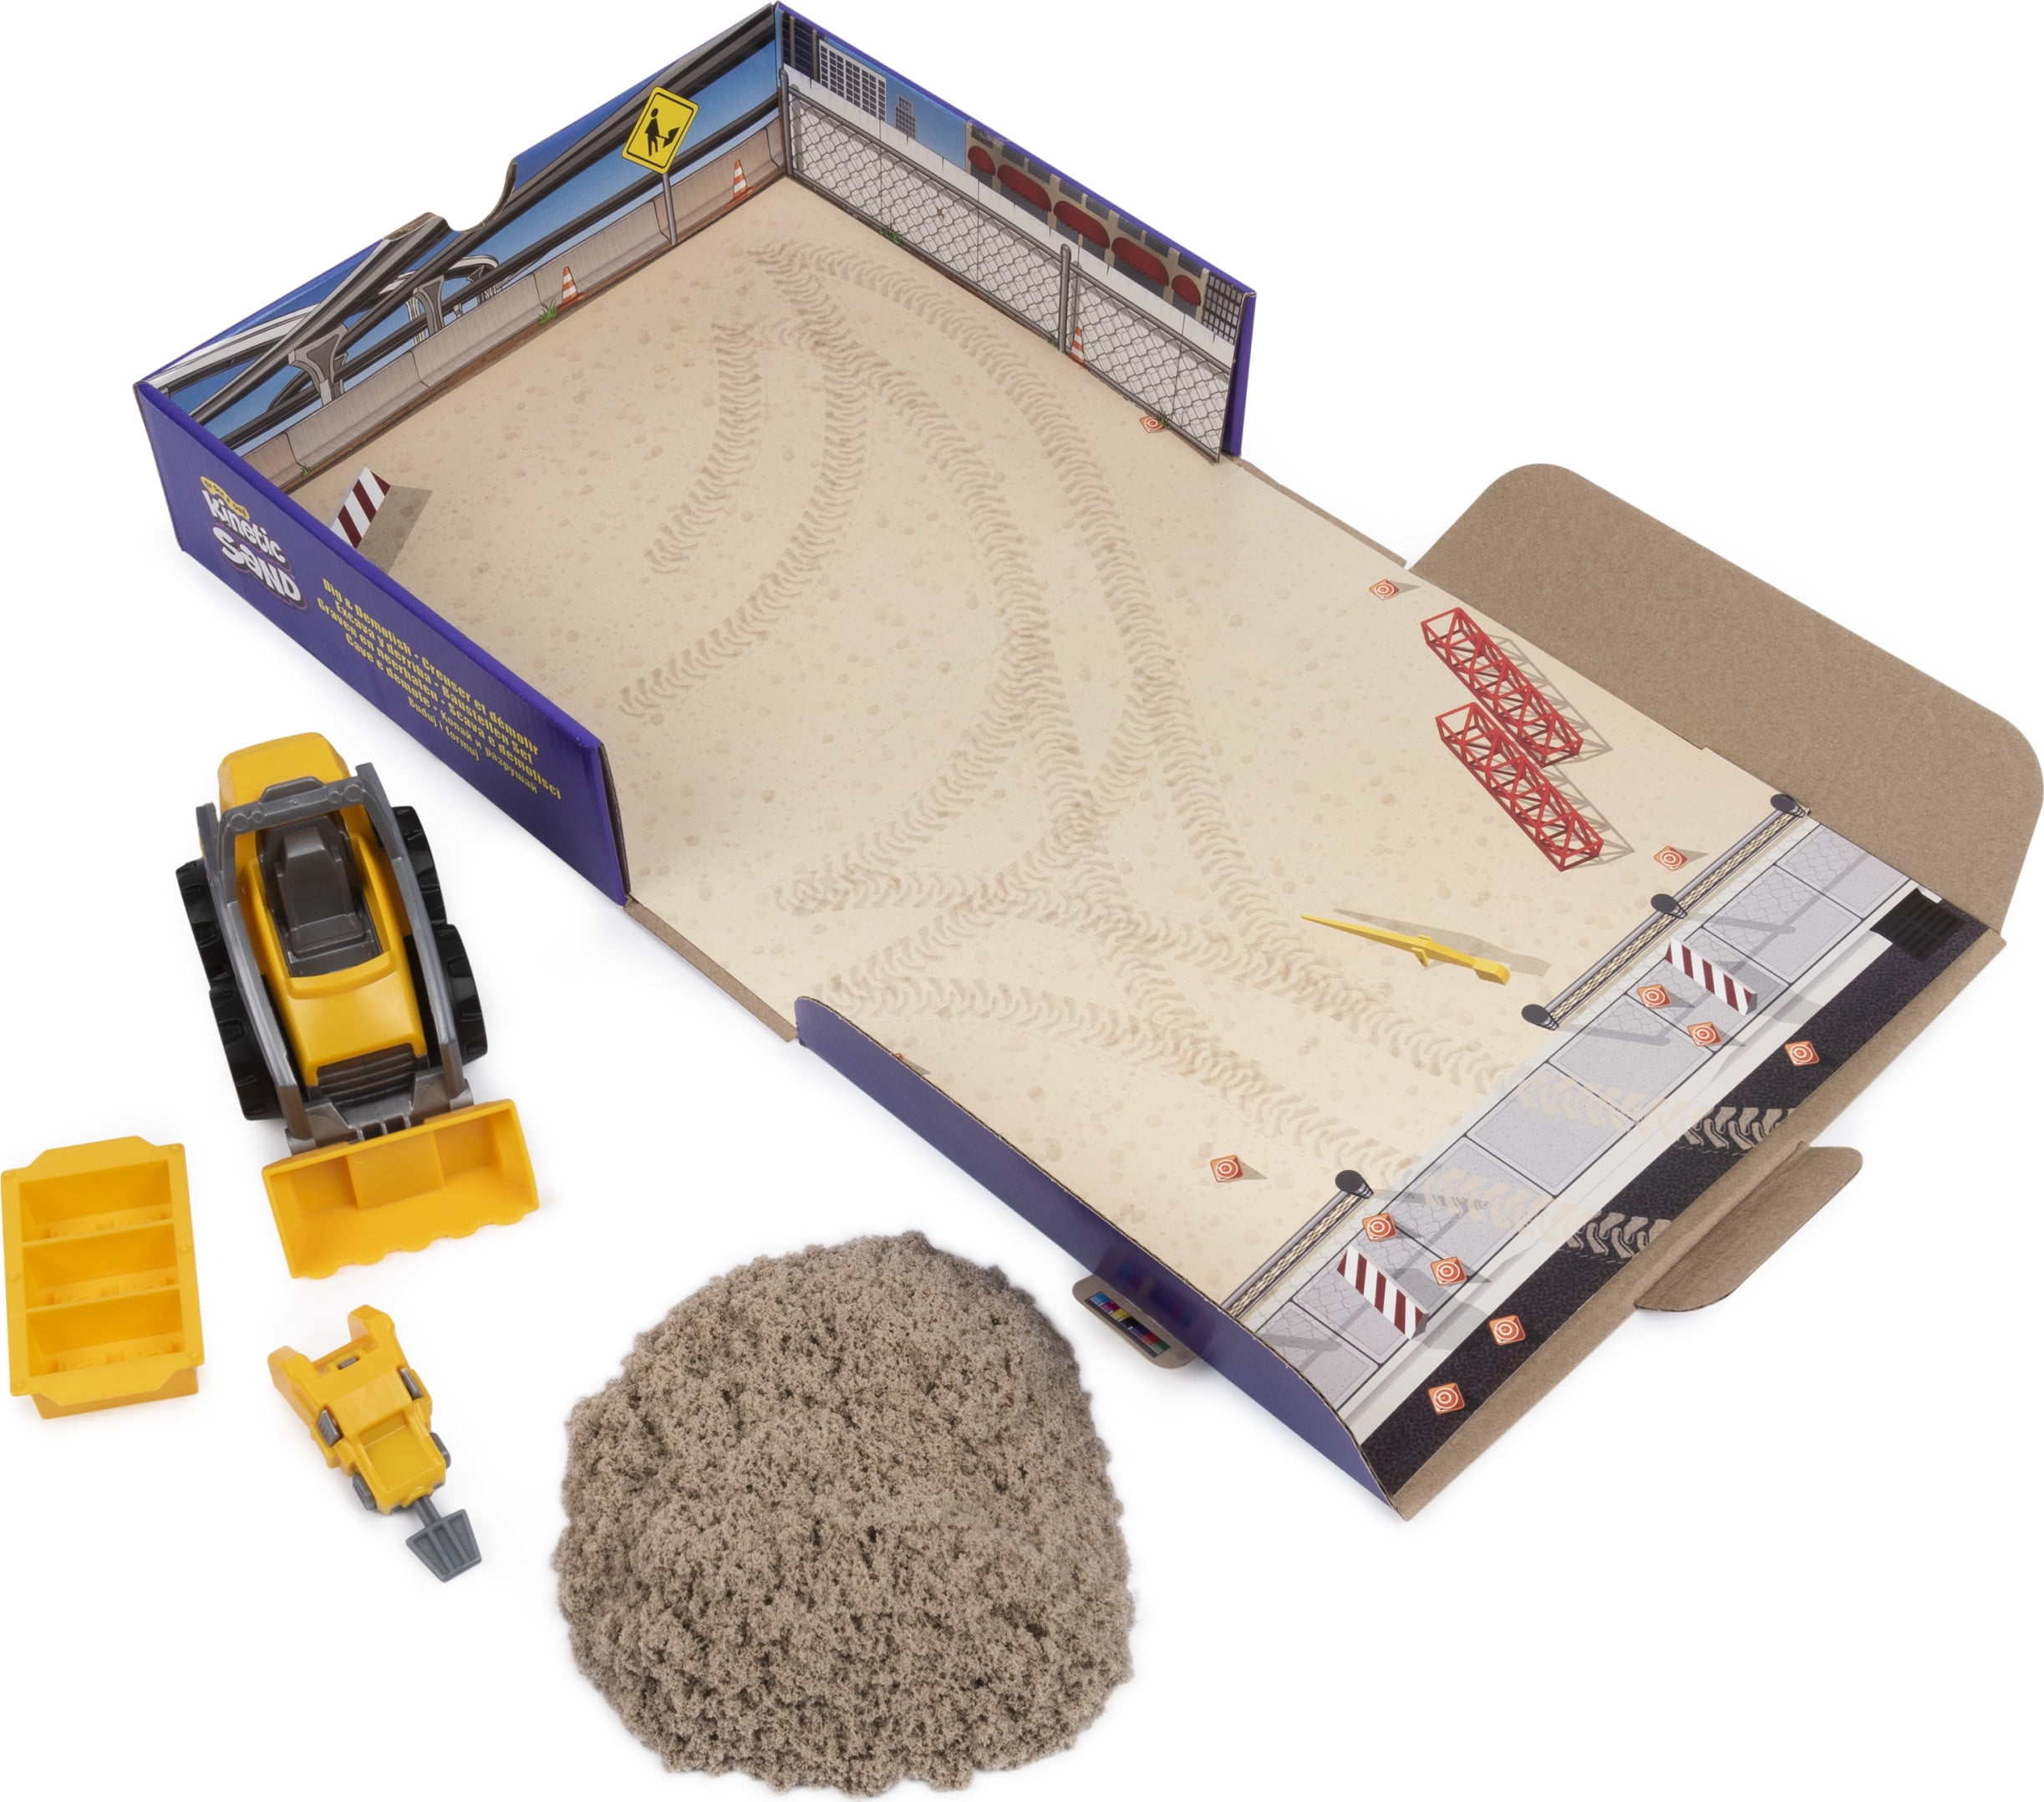 Kinetic Sand, Dig & Demolish Playset with 1lb Kinetic Sand and Toy Truck,  Play Sand Sensory Toys for Kids Ages 3 and up - Walmart.com